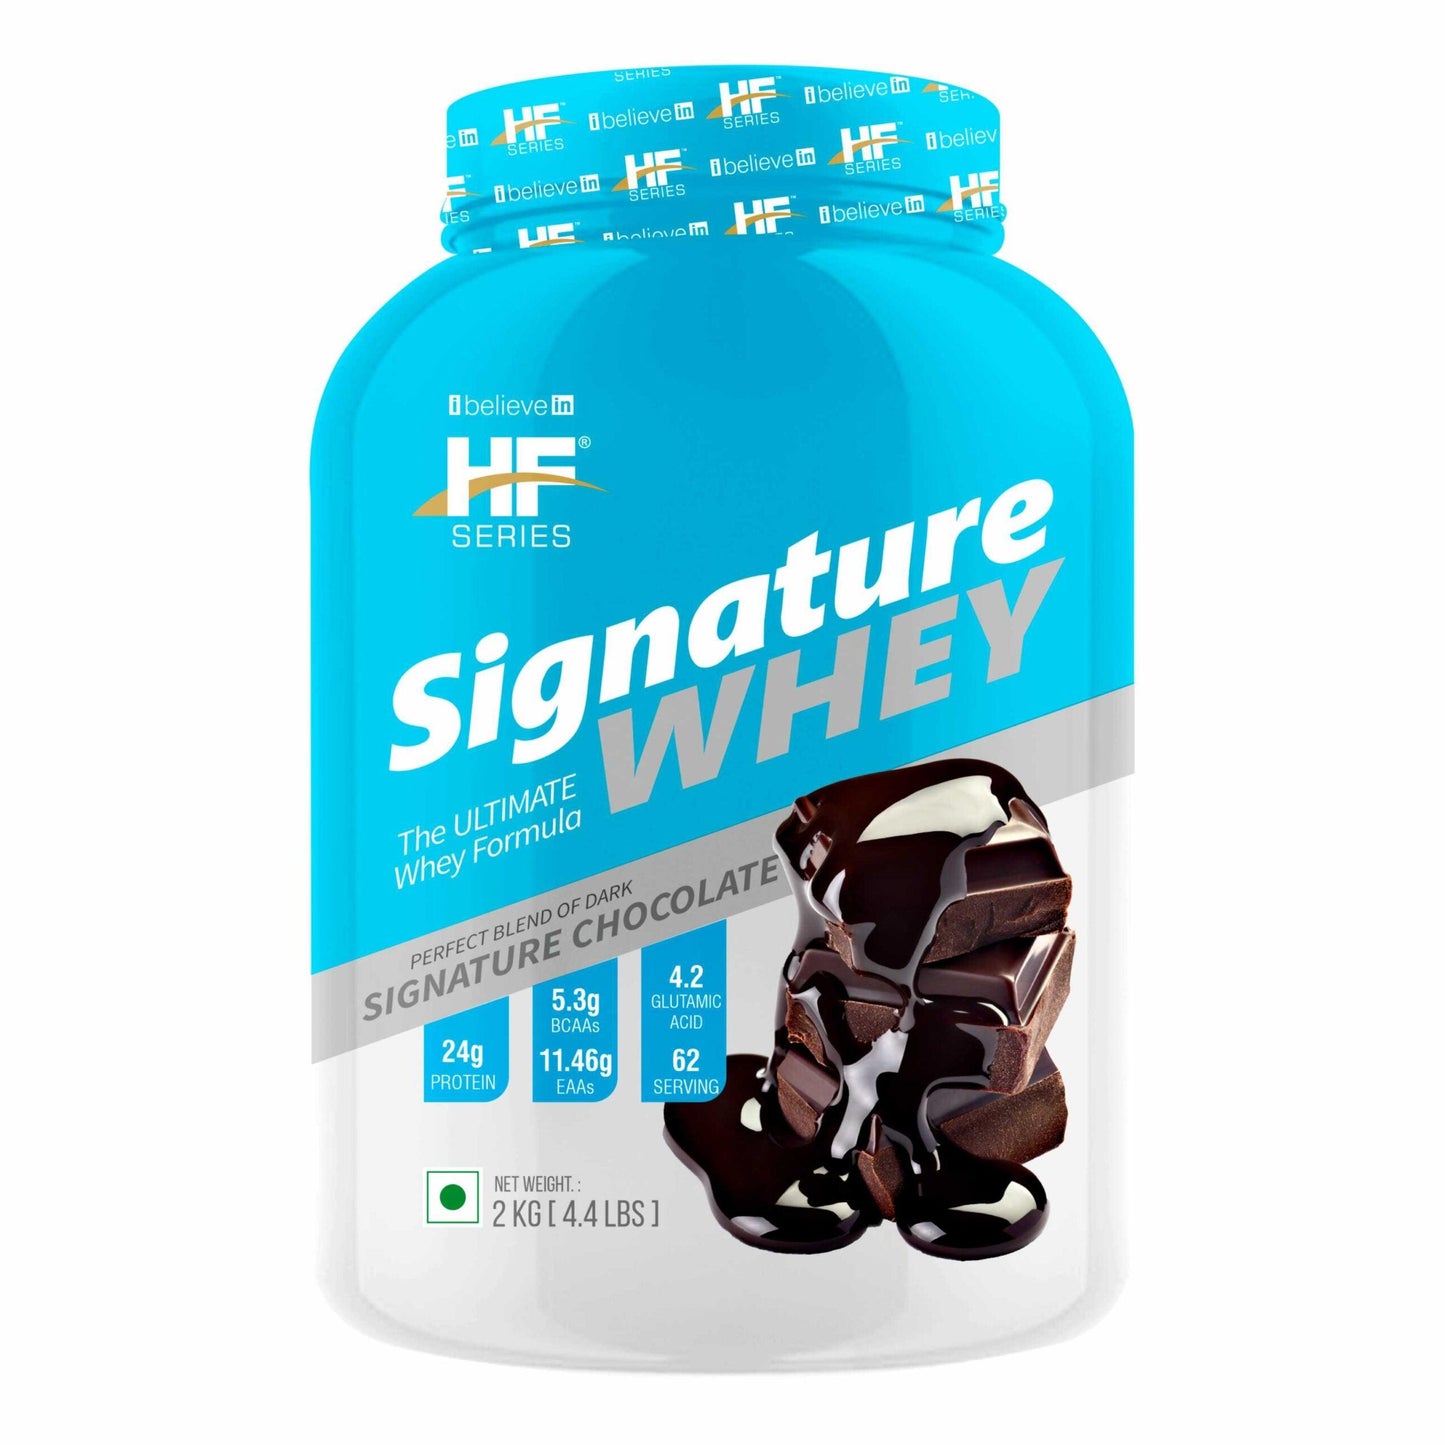 HF Series Signature Whey protein Powder|With added EAA and Glutamine|62 servings|Build Lean and Bigger Muscles|2Kg|Flavour-Signature Chocolate - The Muscle Kart.com